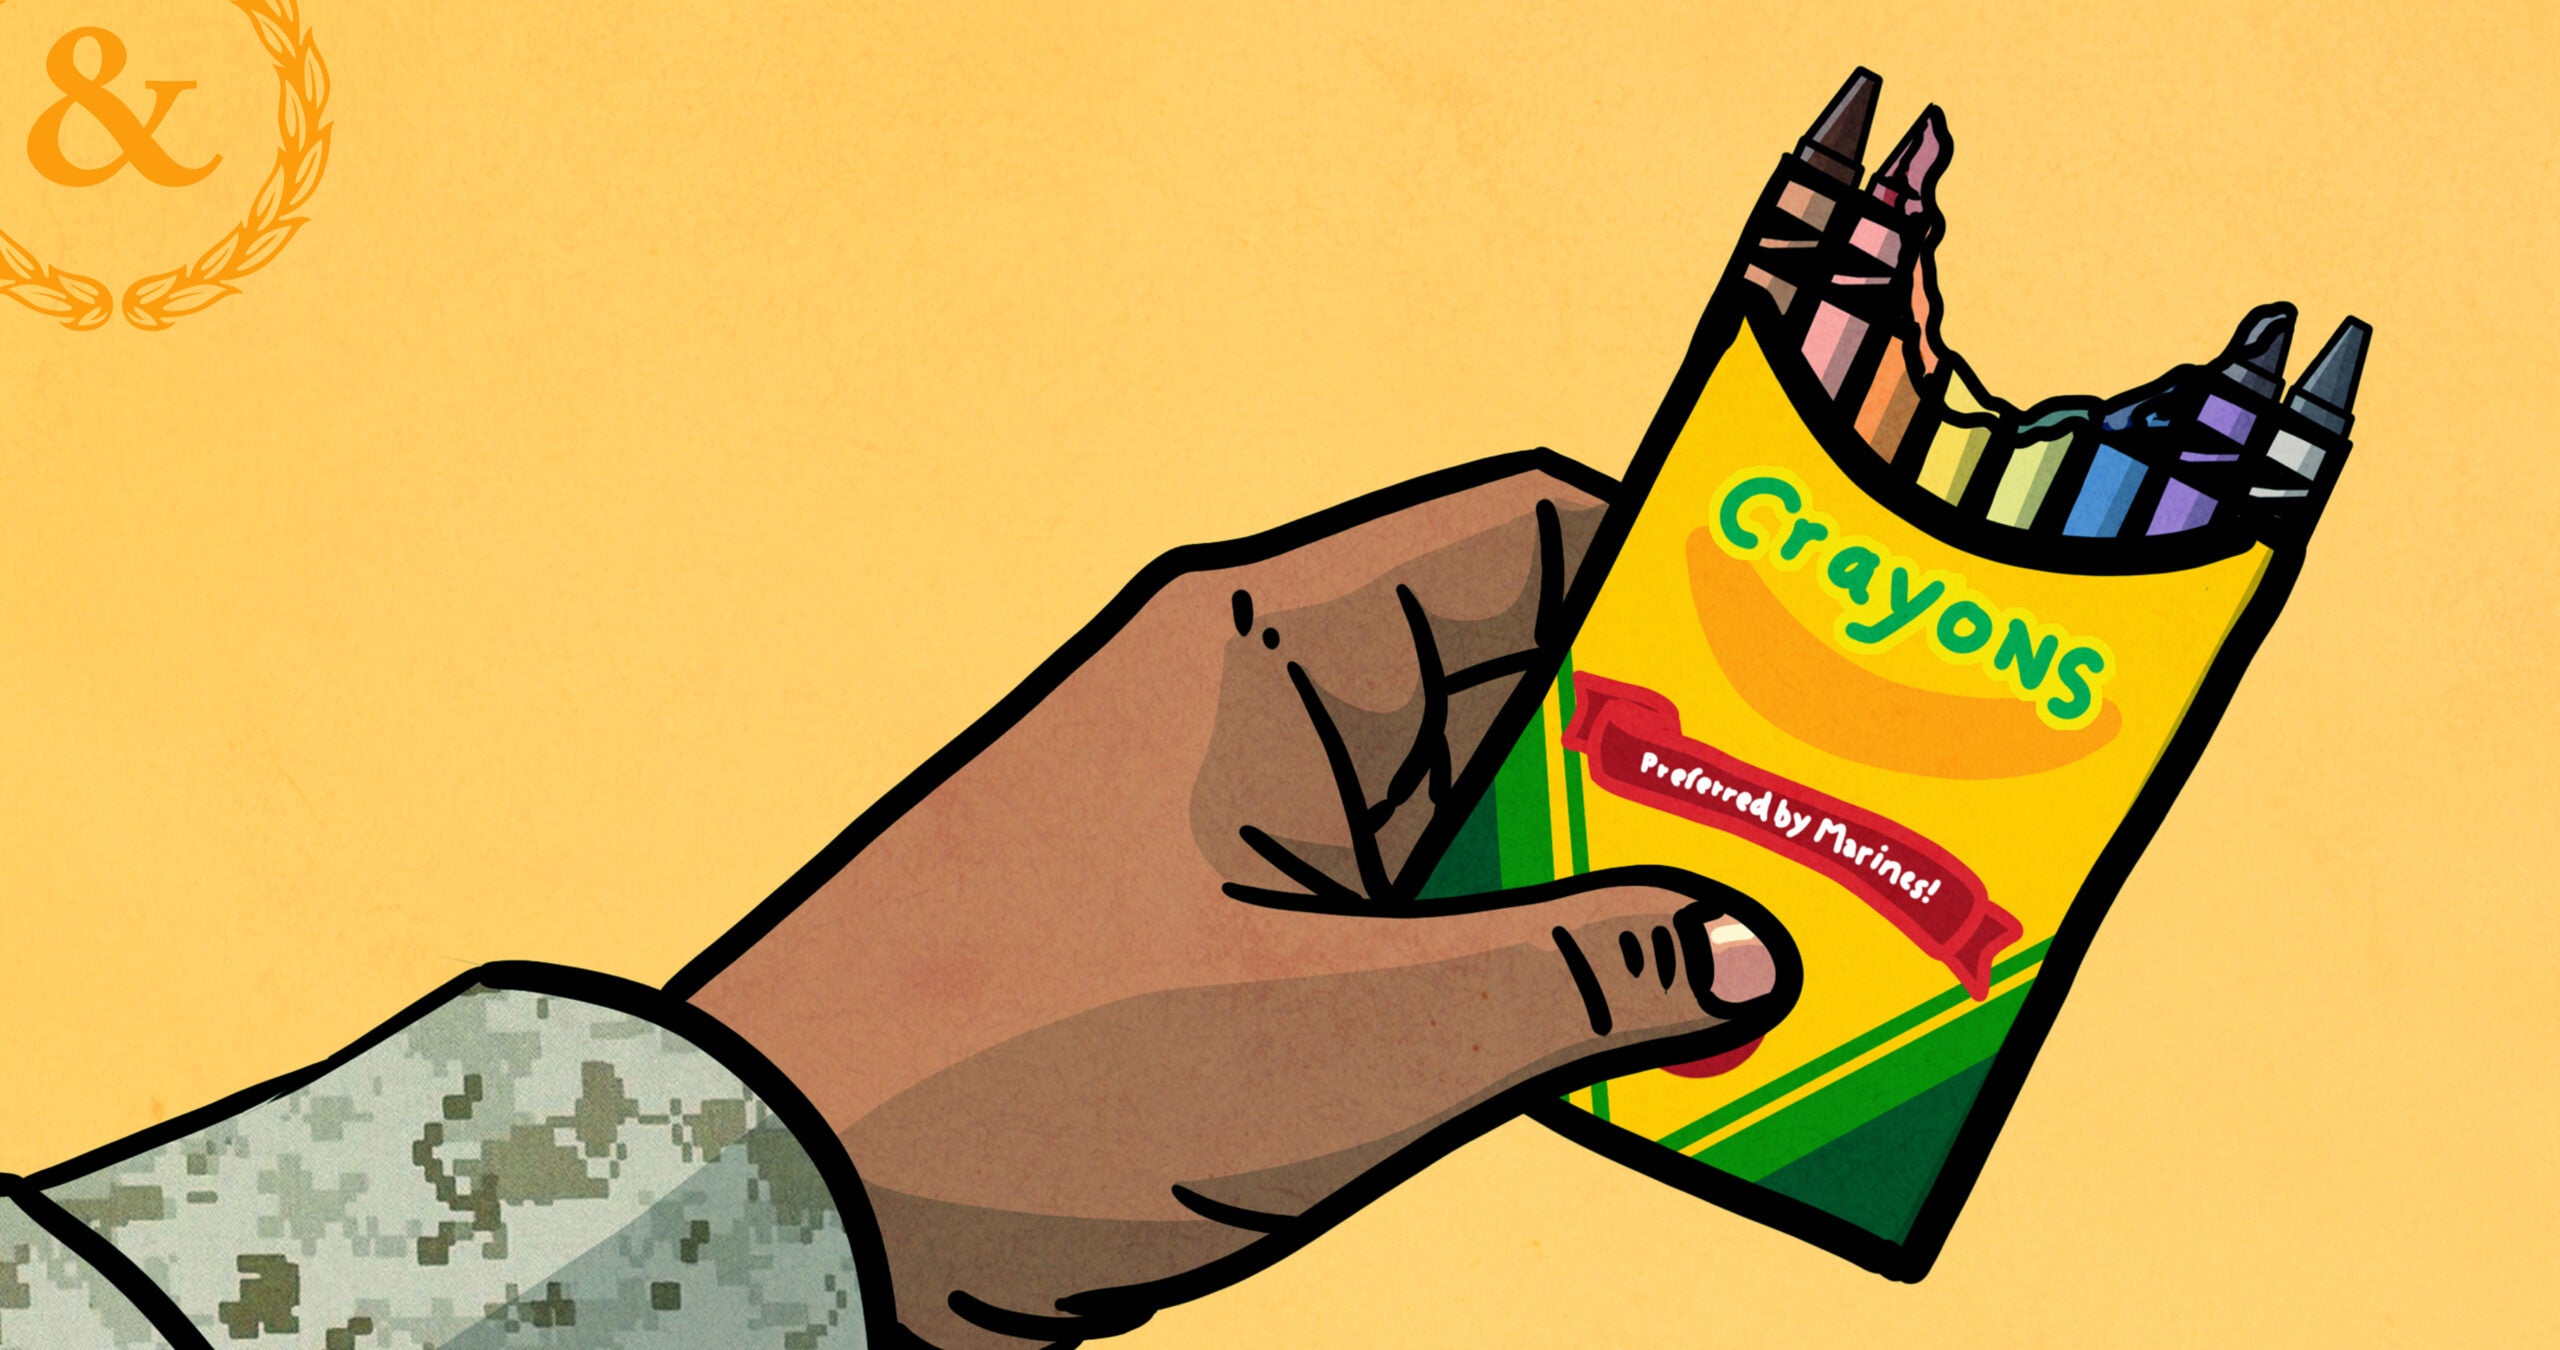 What is it with American soldiers eating crayons? - Quora